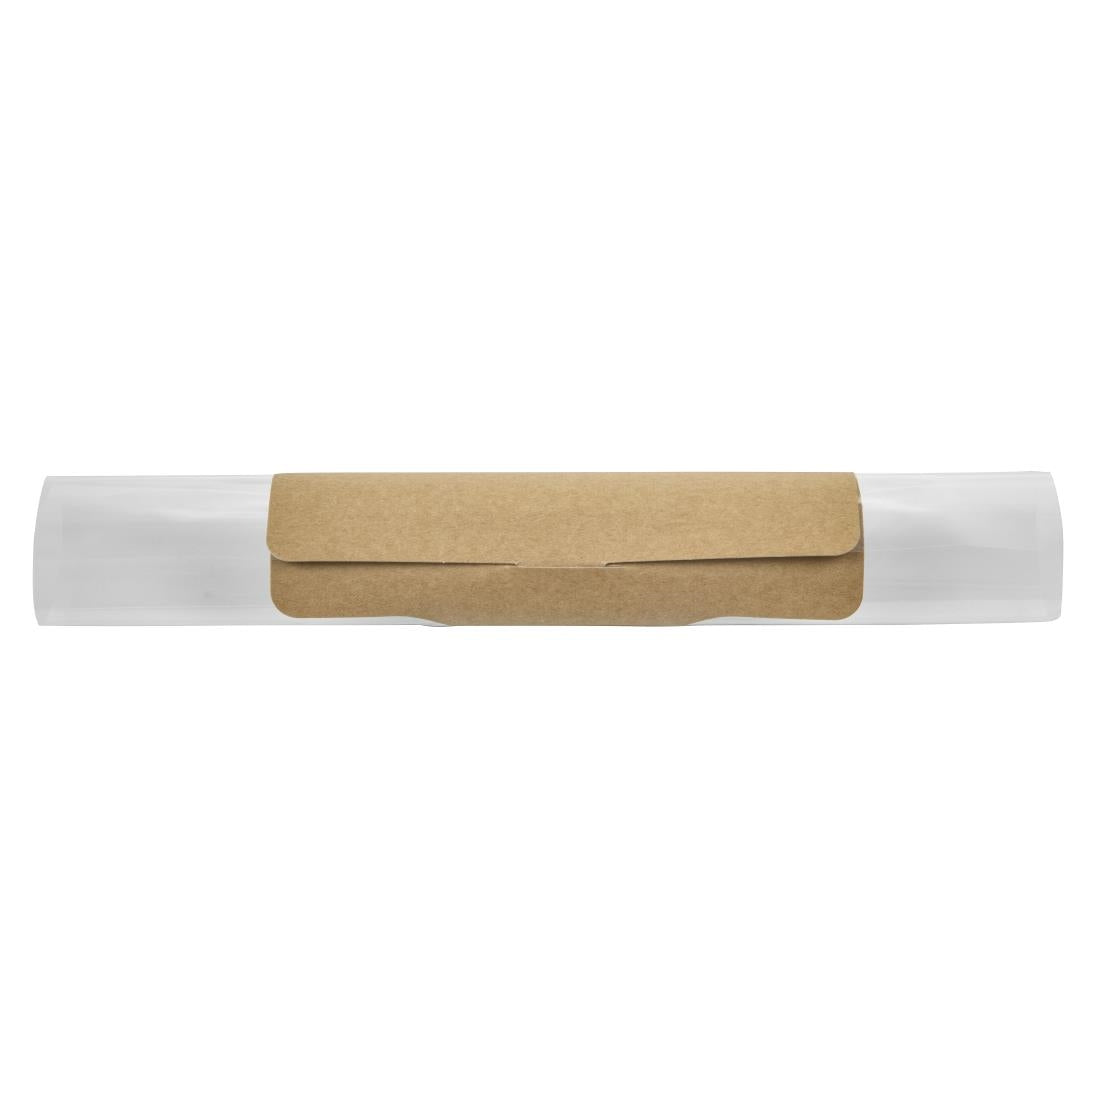 Colpac Clasp Clip Recyclable Kraft Baguette Packs (Pack of 500) JD Catering Equipment Solutions Ltd